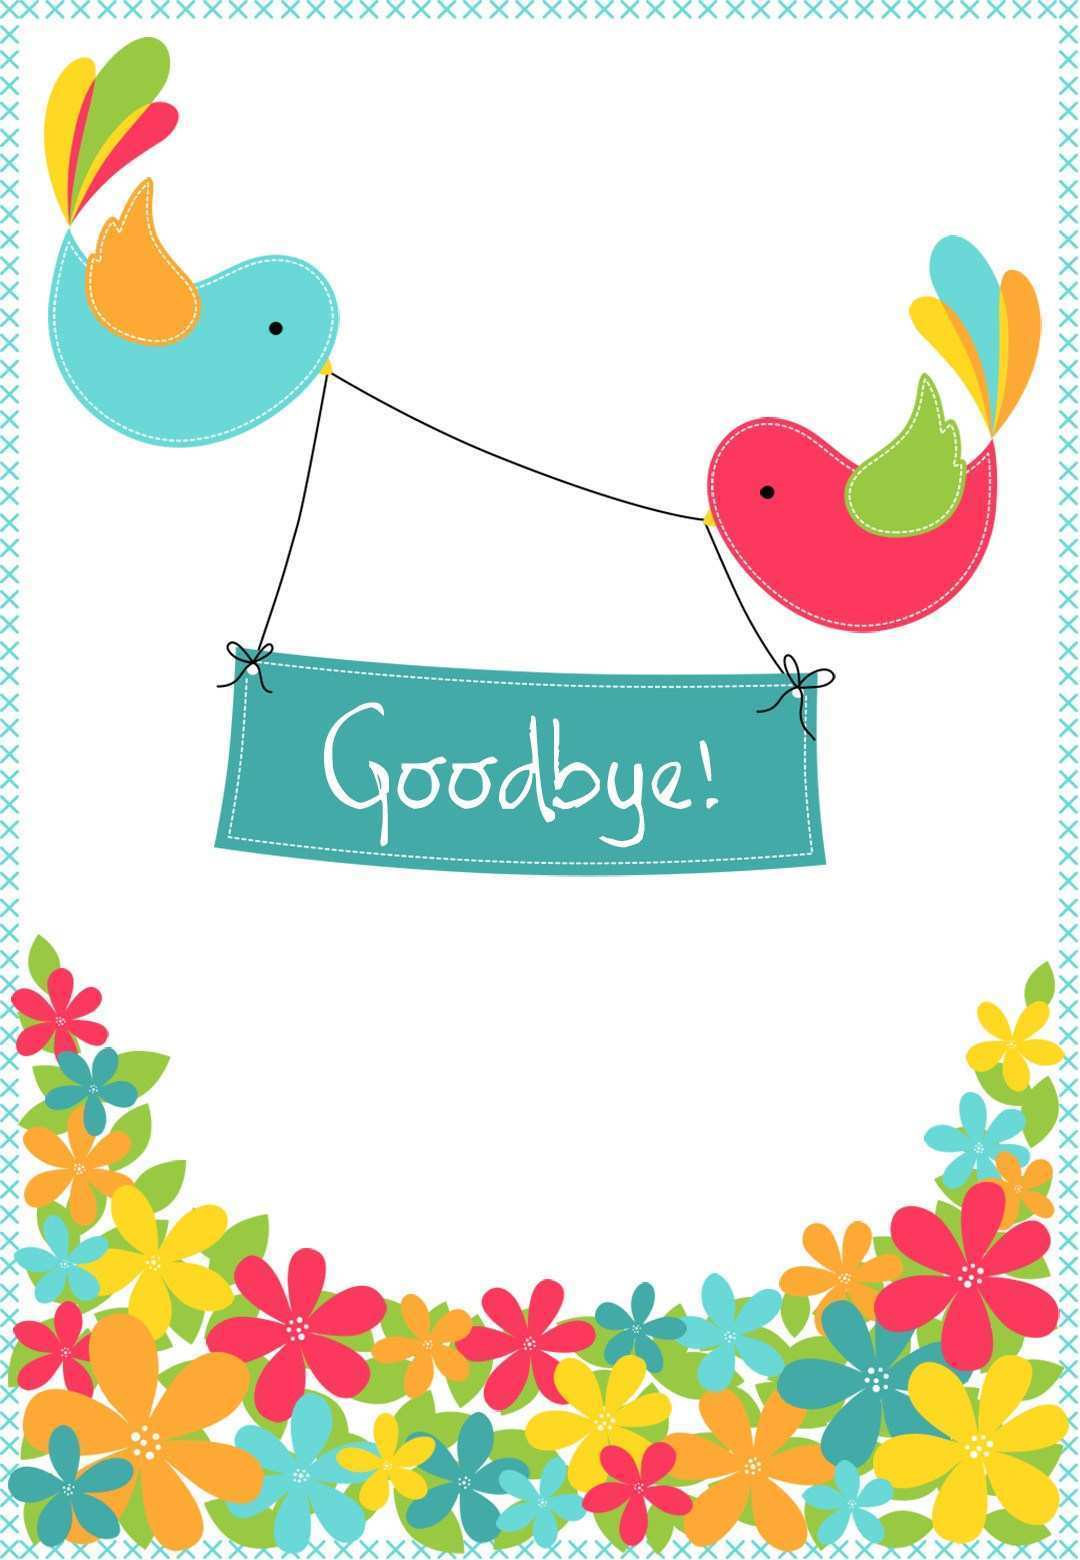 21 Create Free Farewell Card Template Word in Photoshop for Free With Goodbye Card Template